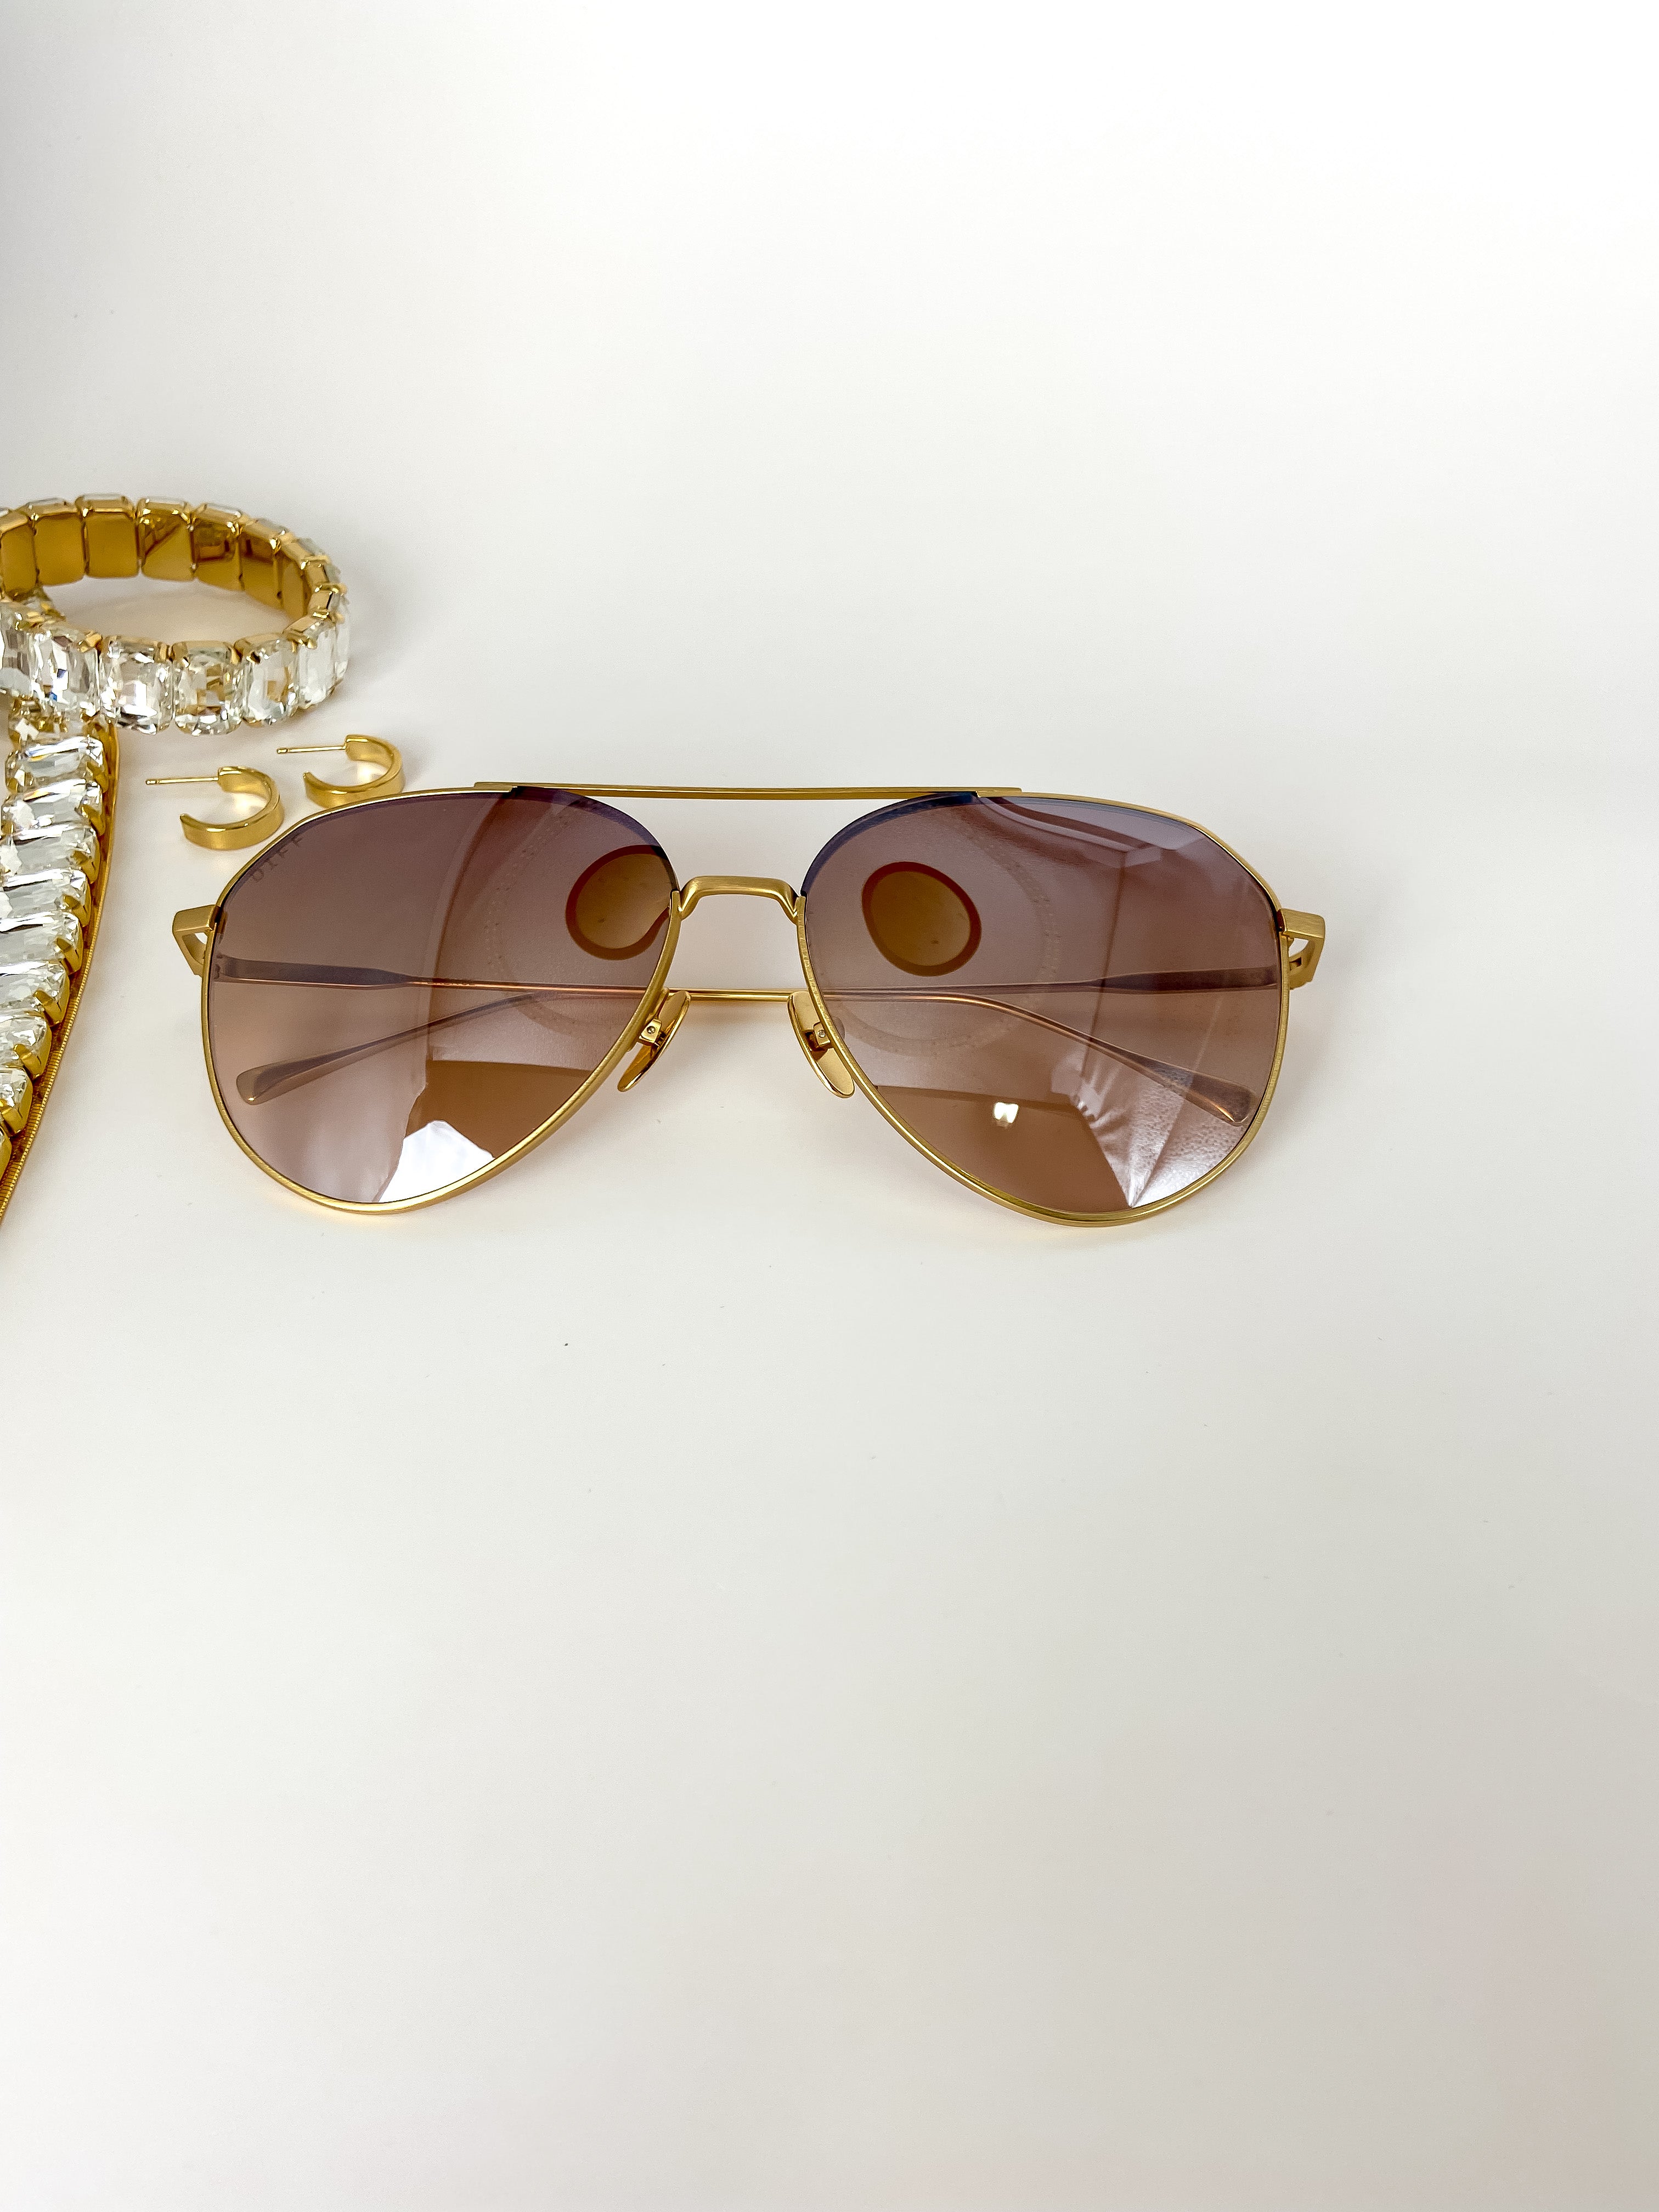 DIFF | Dash Rose Taupe Mirror Lens Sunglasses in Gold Tone - Giddy Up Glamour Boutique